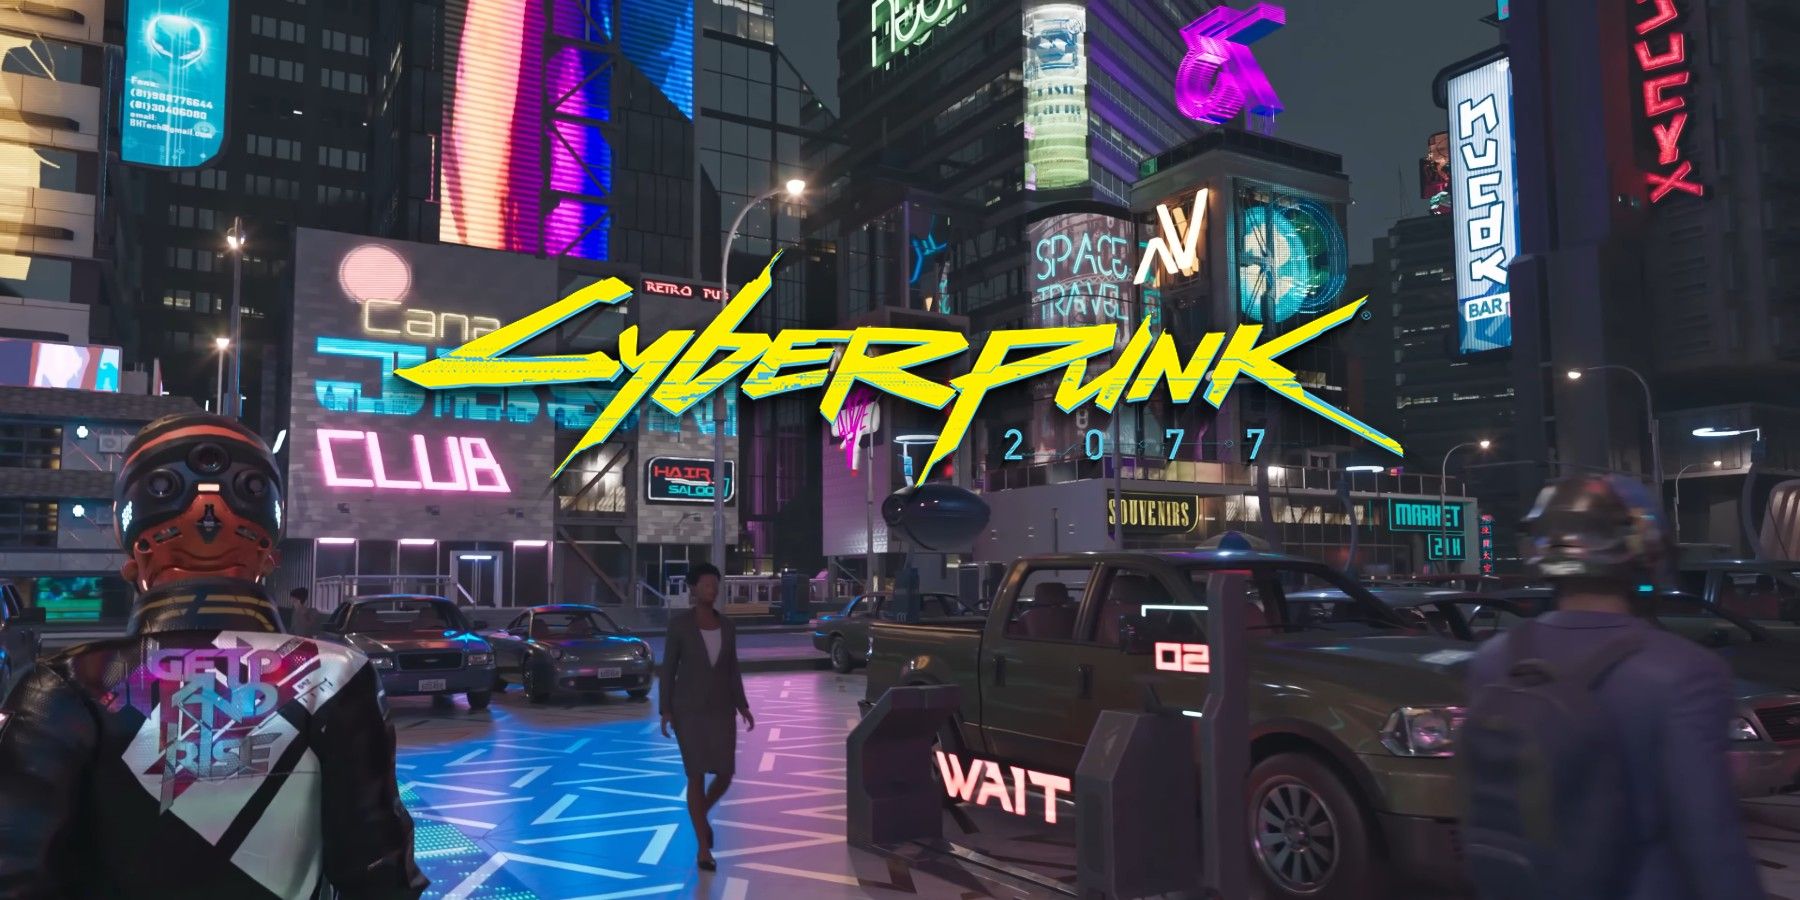 Cyberpunk 2077 Should Have Taken More From the TTRPG